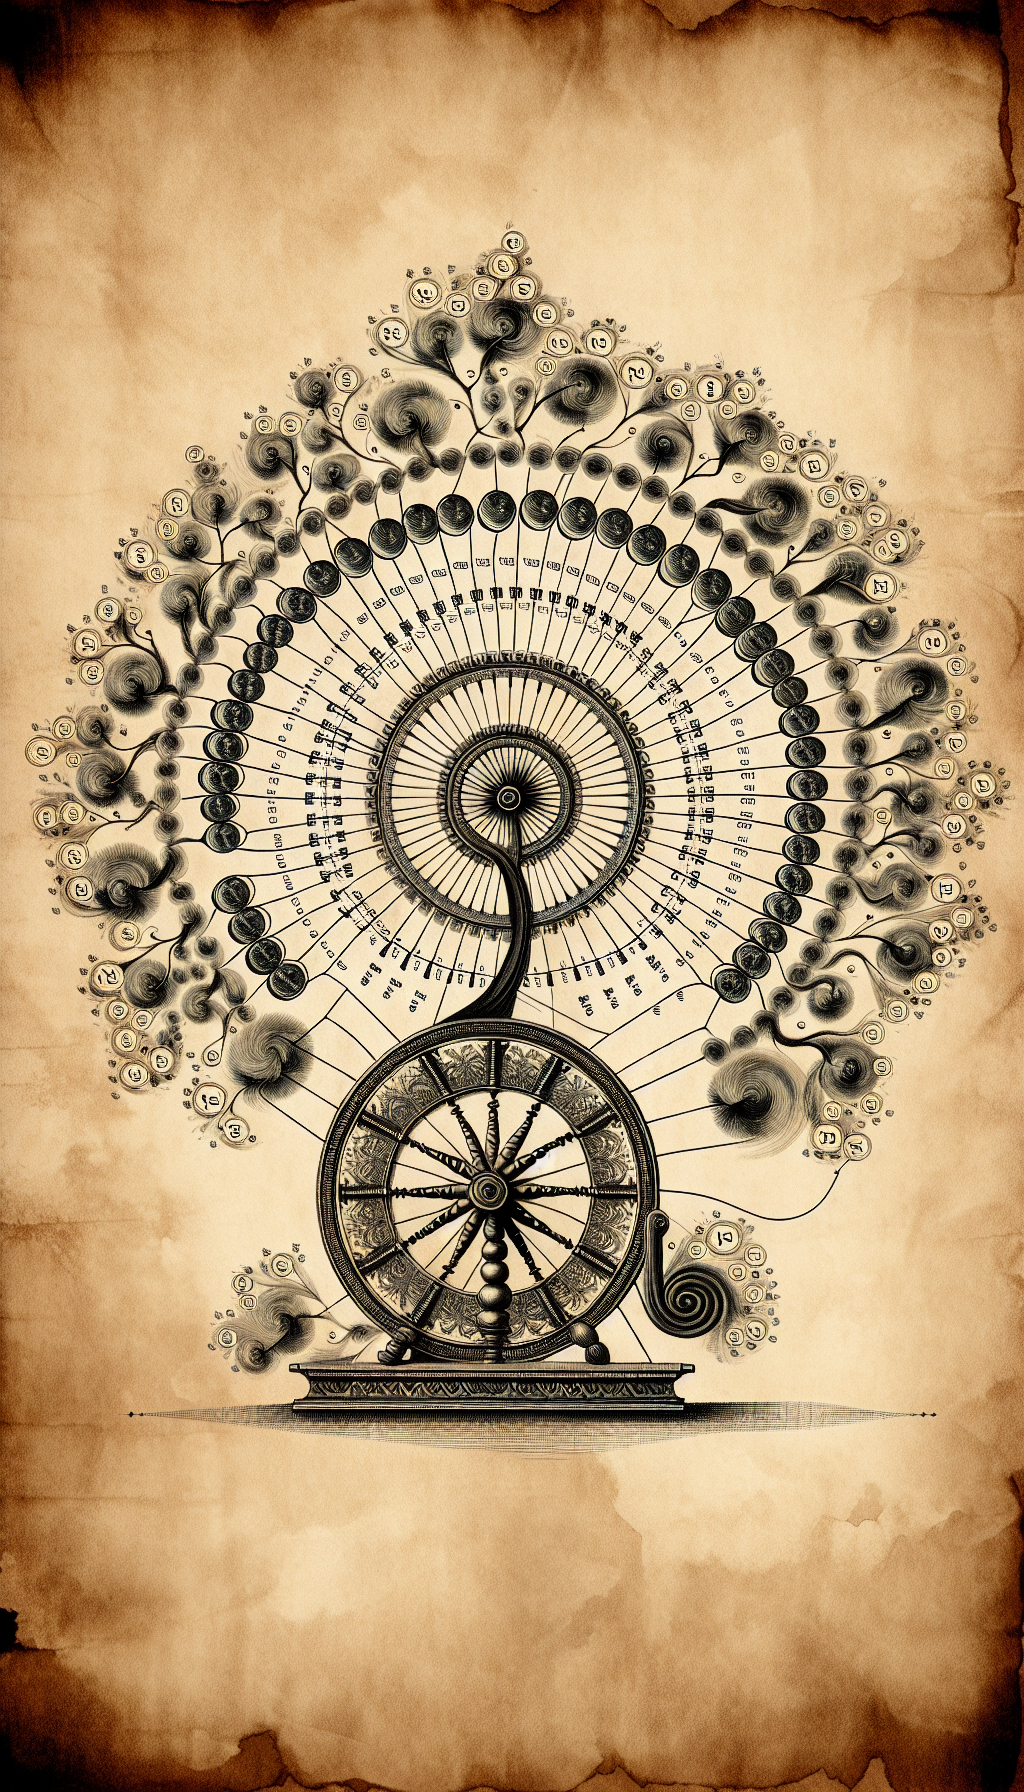 An illustration depicting a graceful, ornate spinning wheel with wisps of thread transitioning into a spiraling family tree, branches adorned with tiny price tags, each marked with increasing value as they reach back in history. The spinning wheel appears almost alive, elegantly etching its own lineage onto an aged parchment, highlighting its historical and monetary significance.